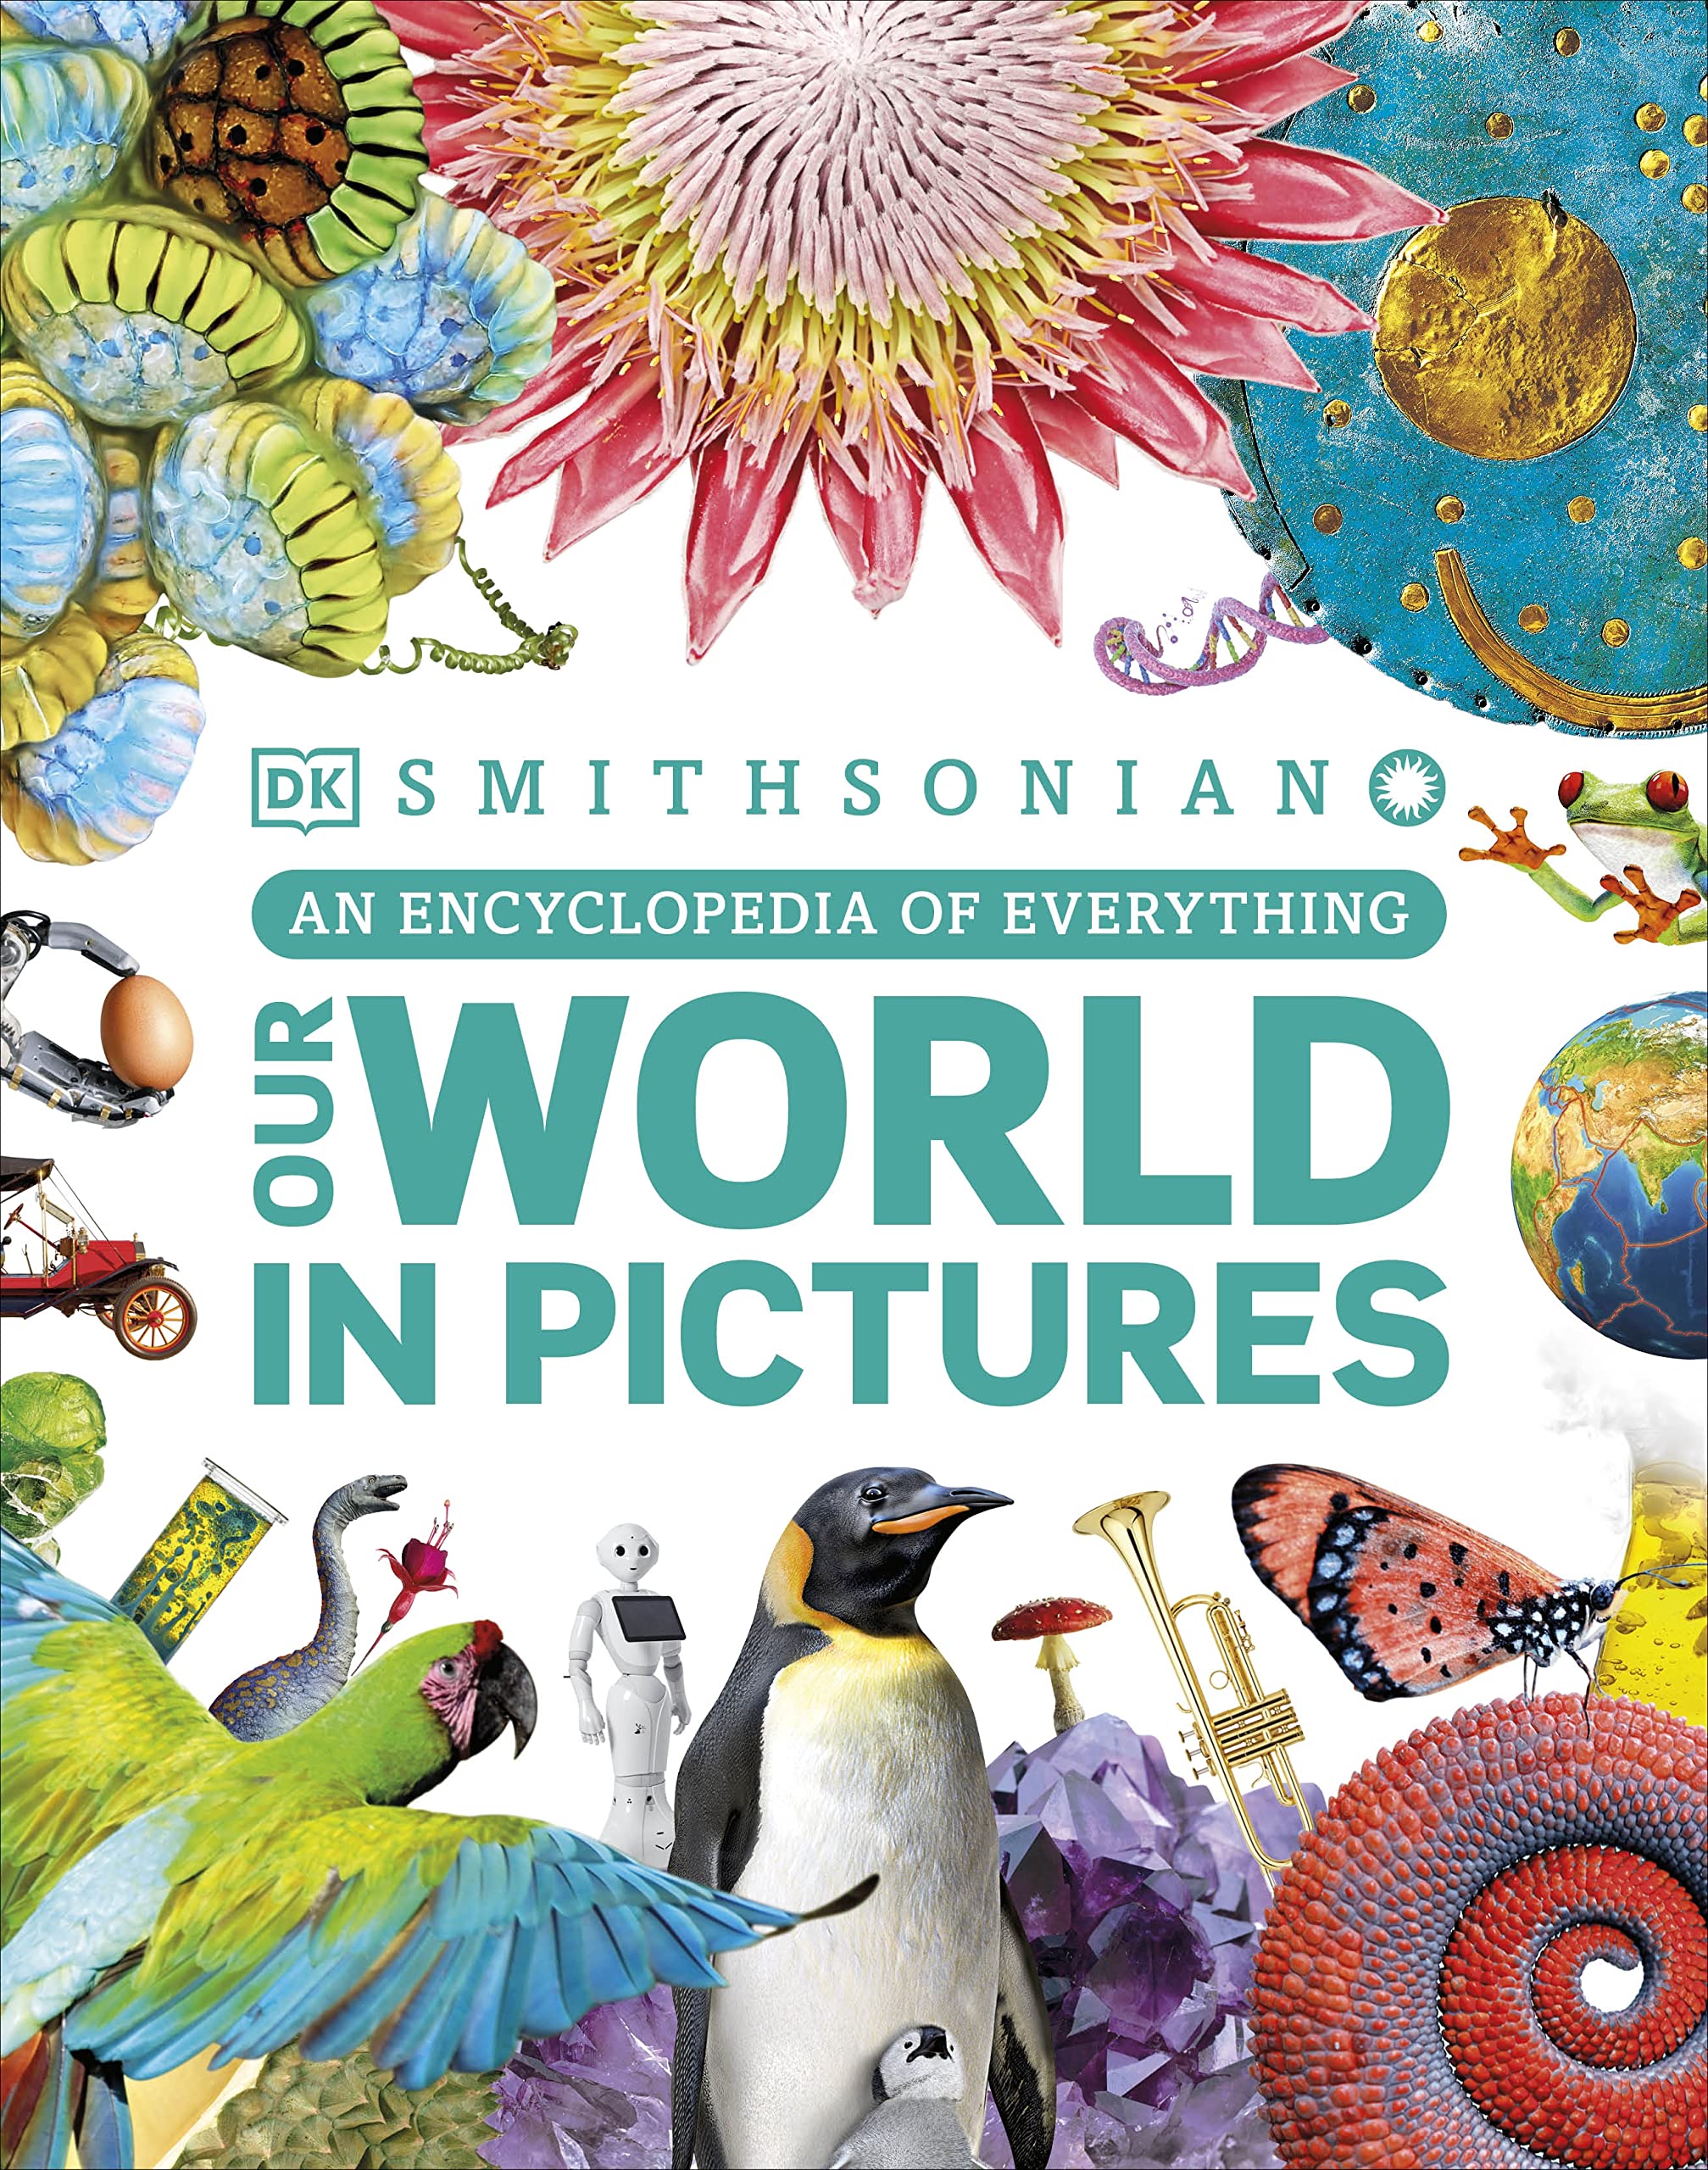 Our World in Pictures: An Encyclopedia of Everything (DK Our World in Pictures)